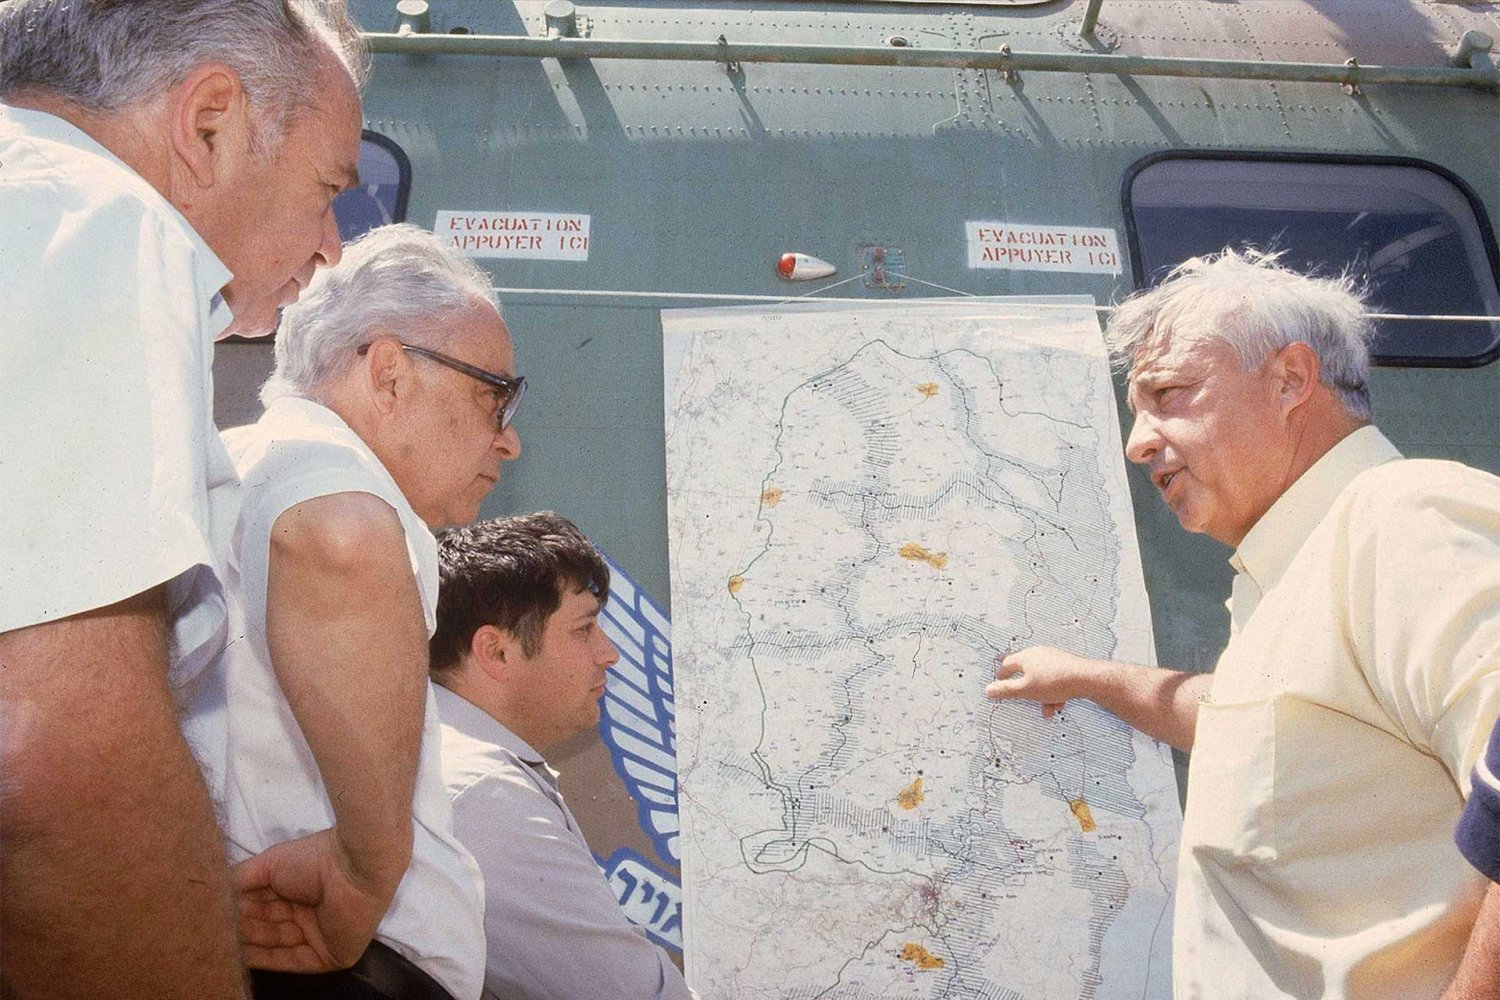 Israeli Minister of Agriculture Ariel Sharon shows a map of West Bank settlements, in Israel, July 1979.